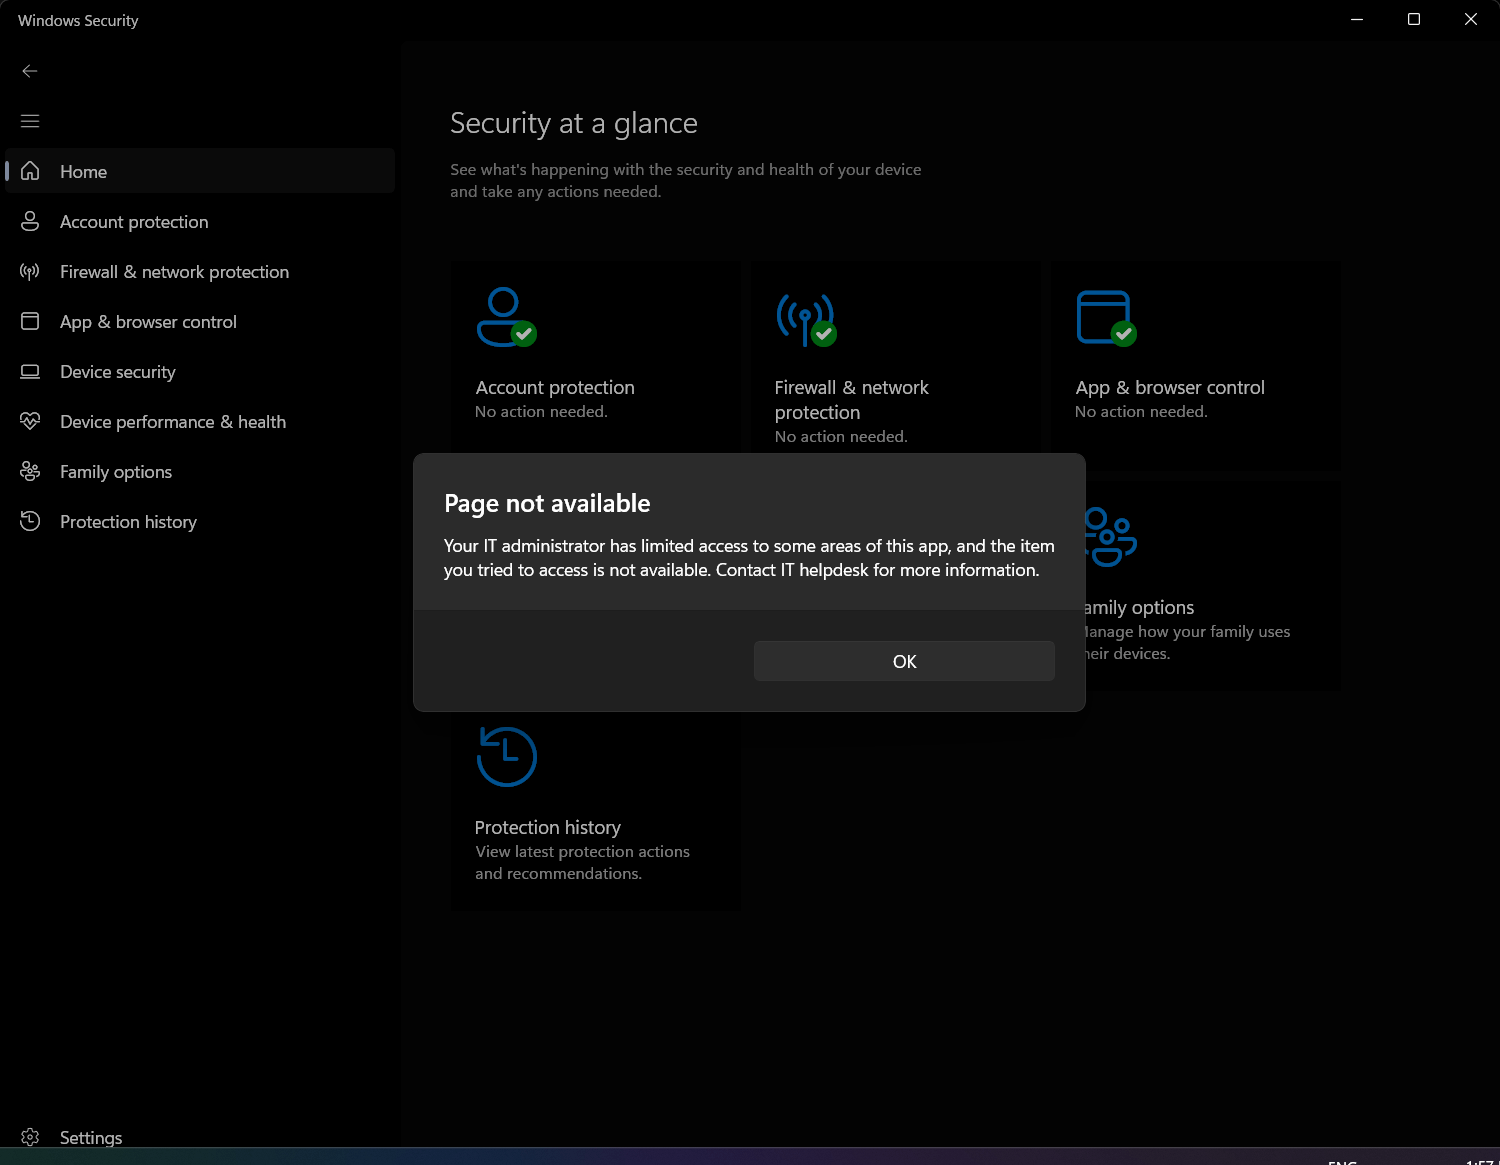 Virus and threat protection page not available in Windows 11